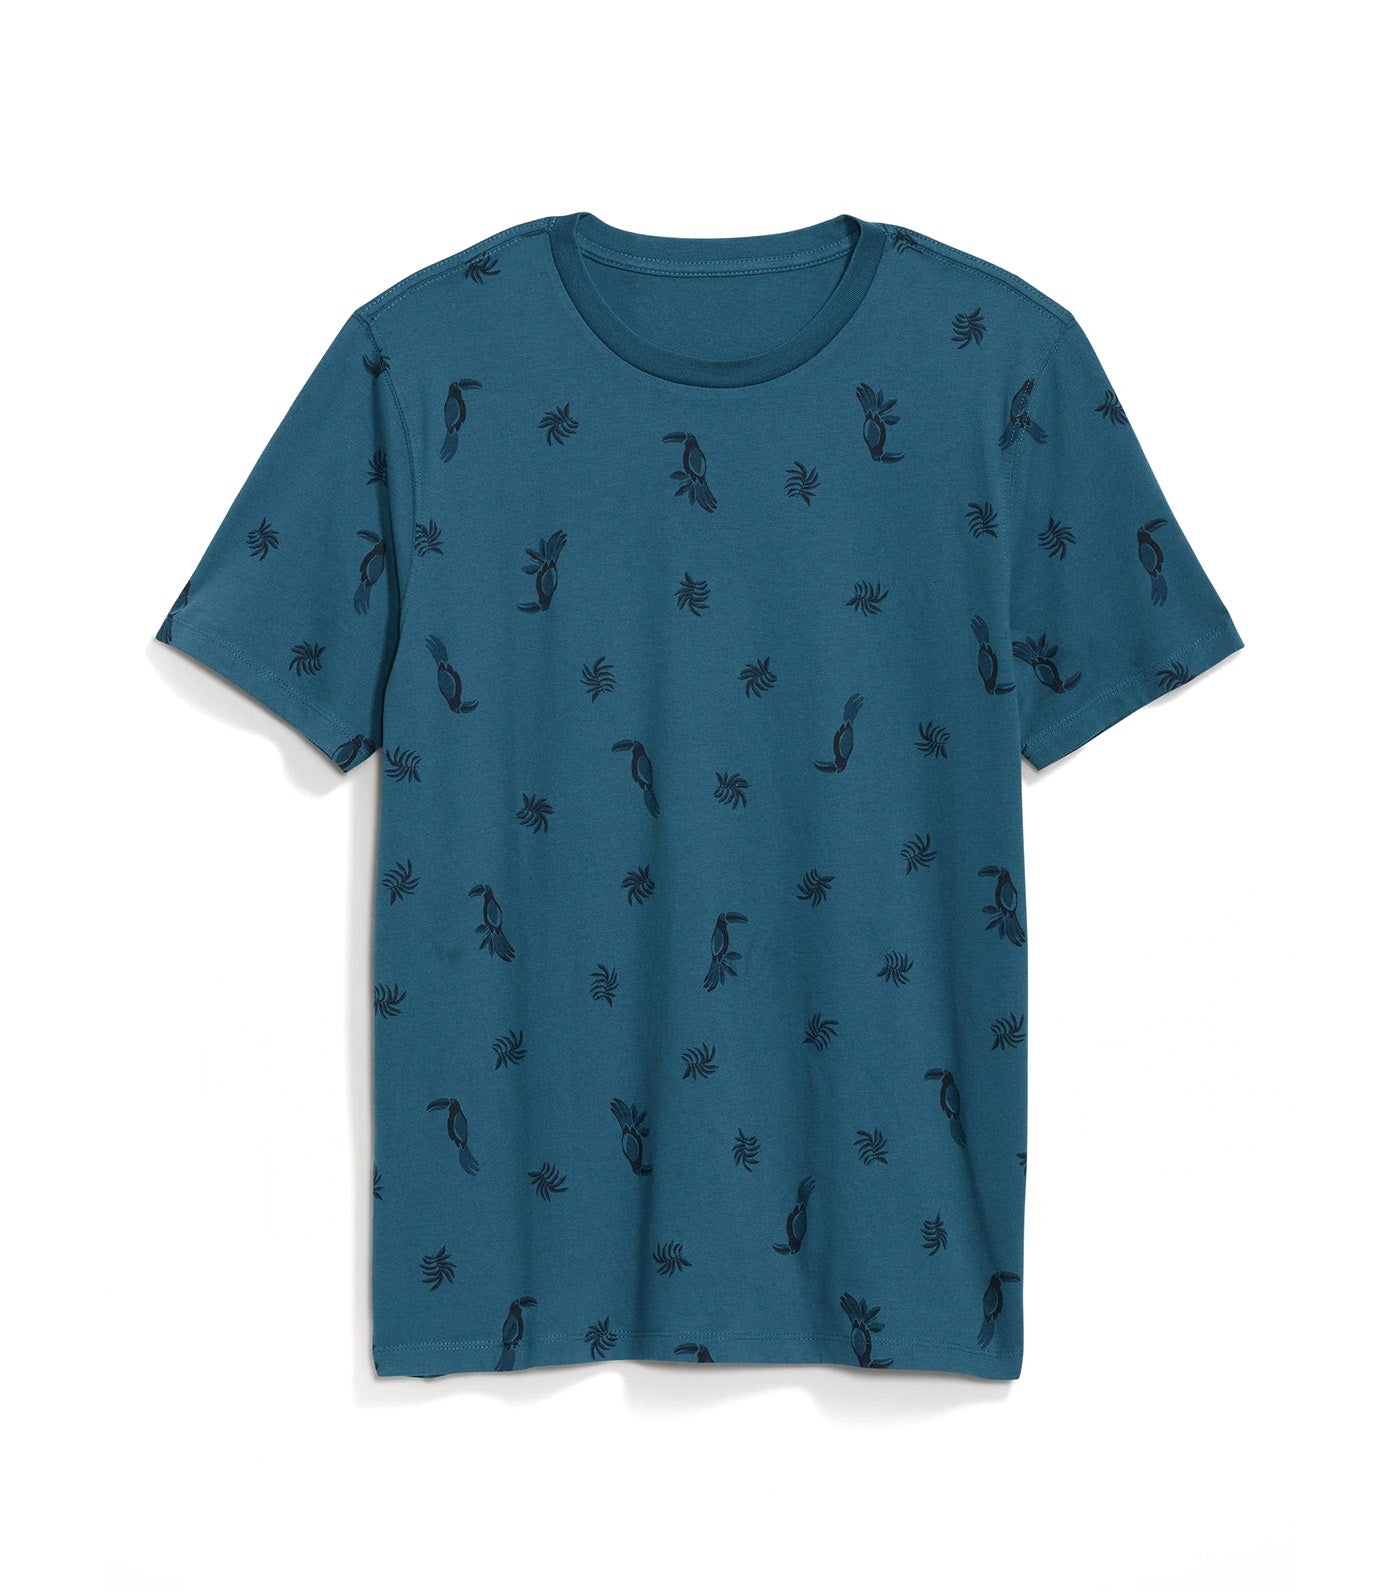 Soft-Washed Printed Crew-Neck T-Shirt for Men Toucan Pattern